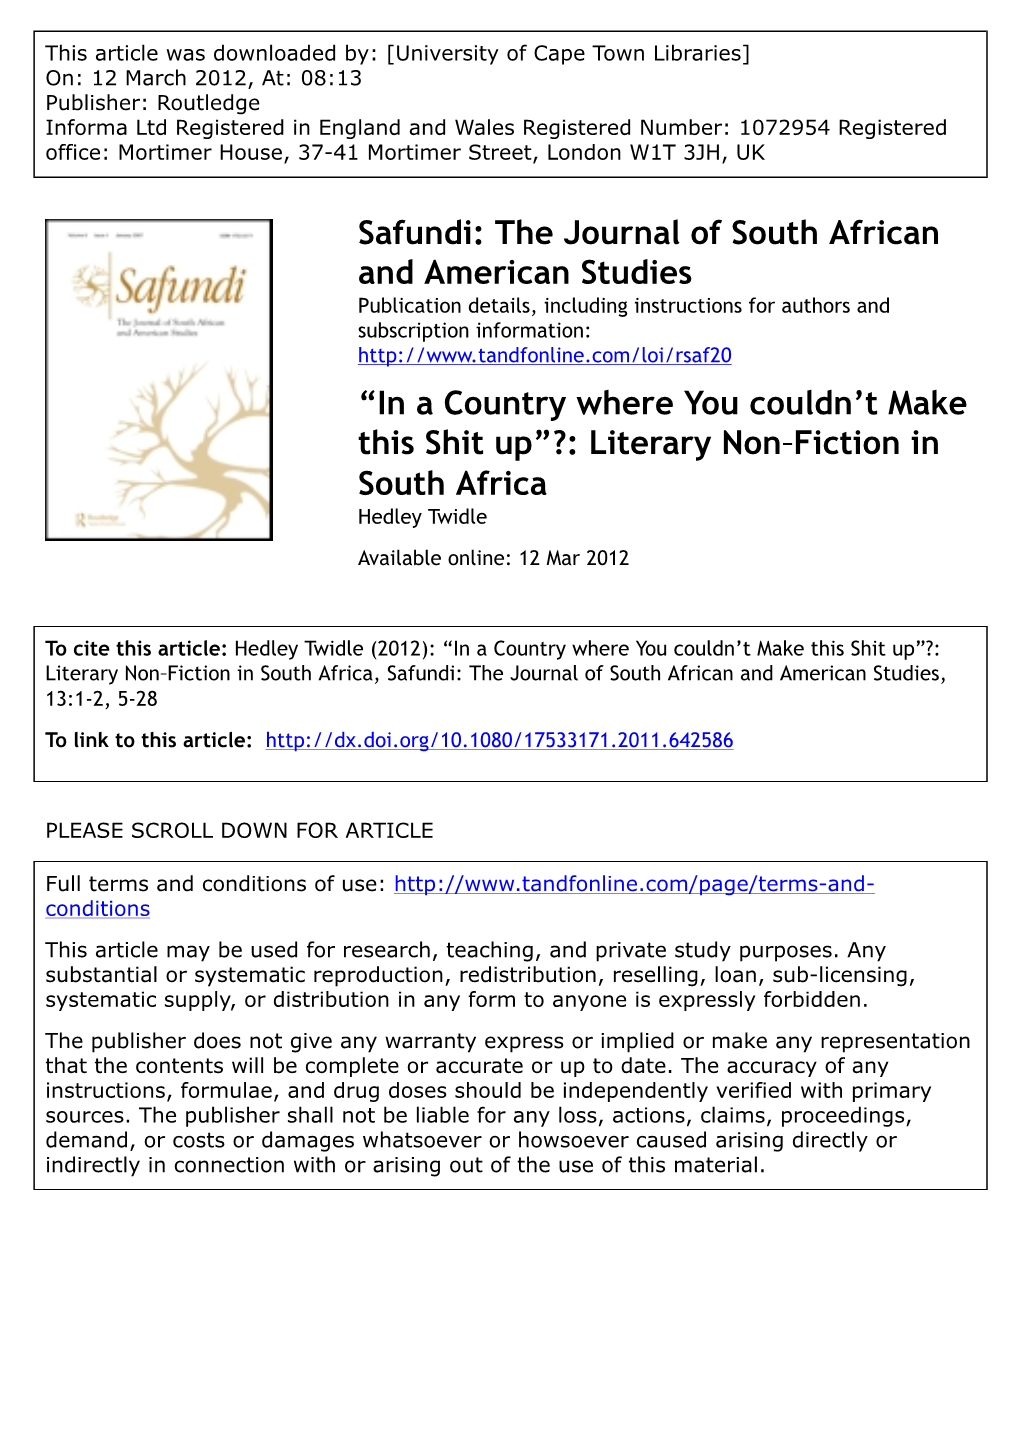 Literary Non‐Fiction in South Africa Hedley Twidle Available Online: 12 Mar 2012